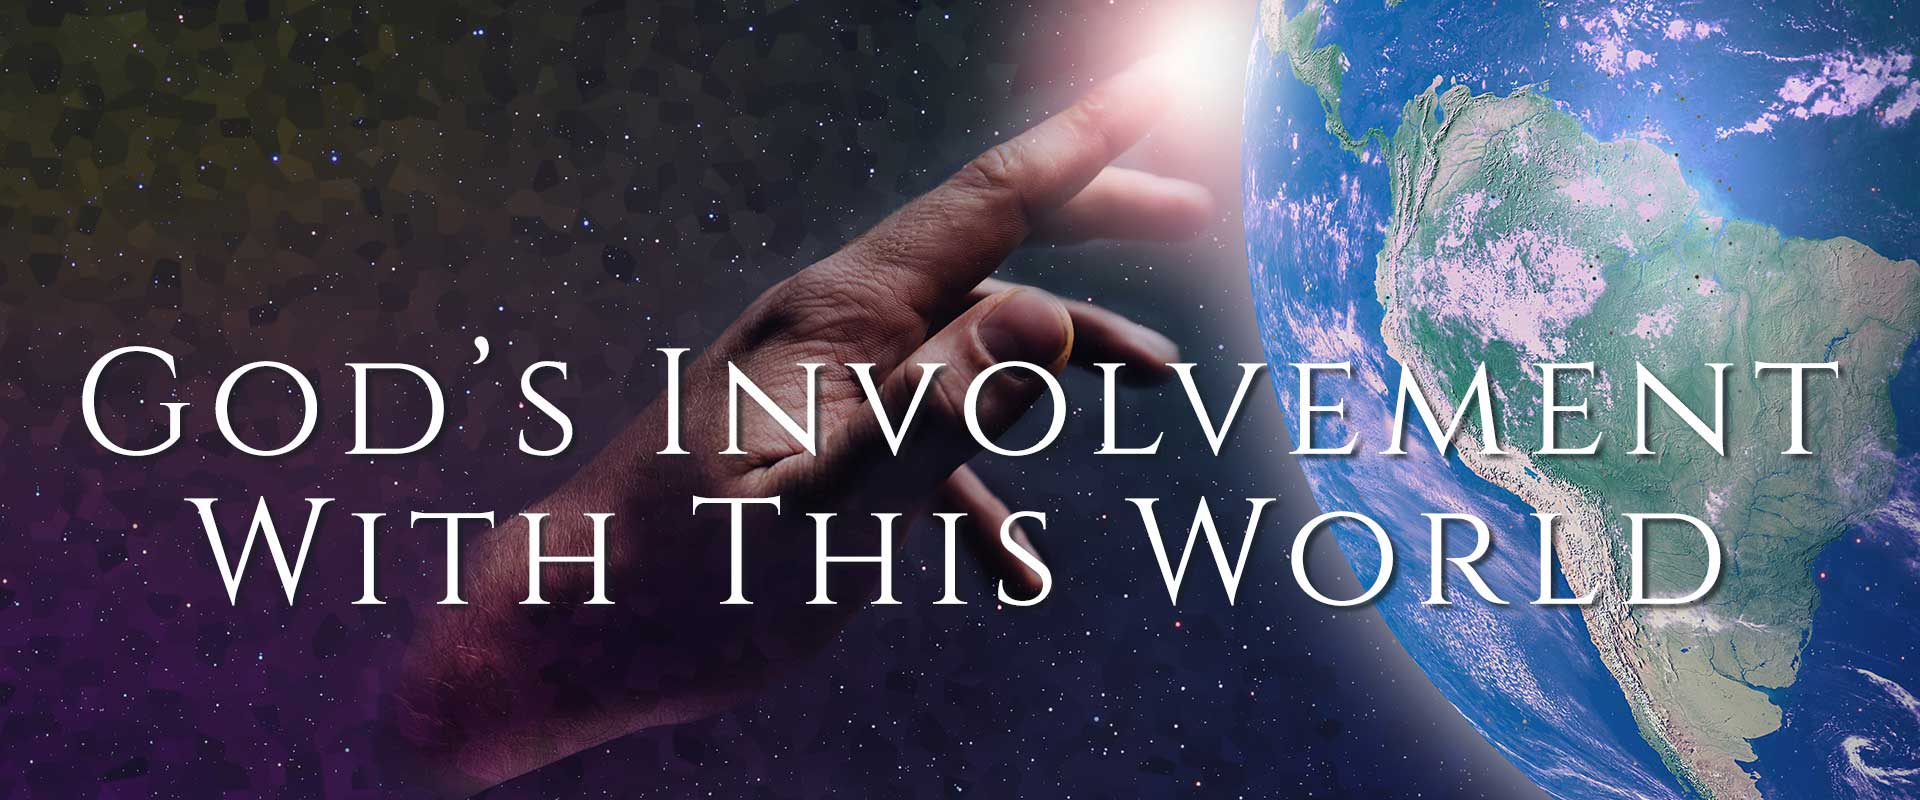 Volume II: God's Involvement with this World